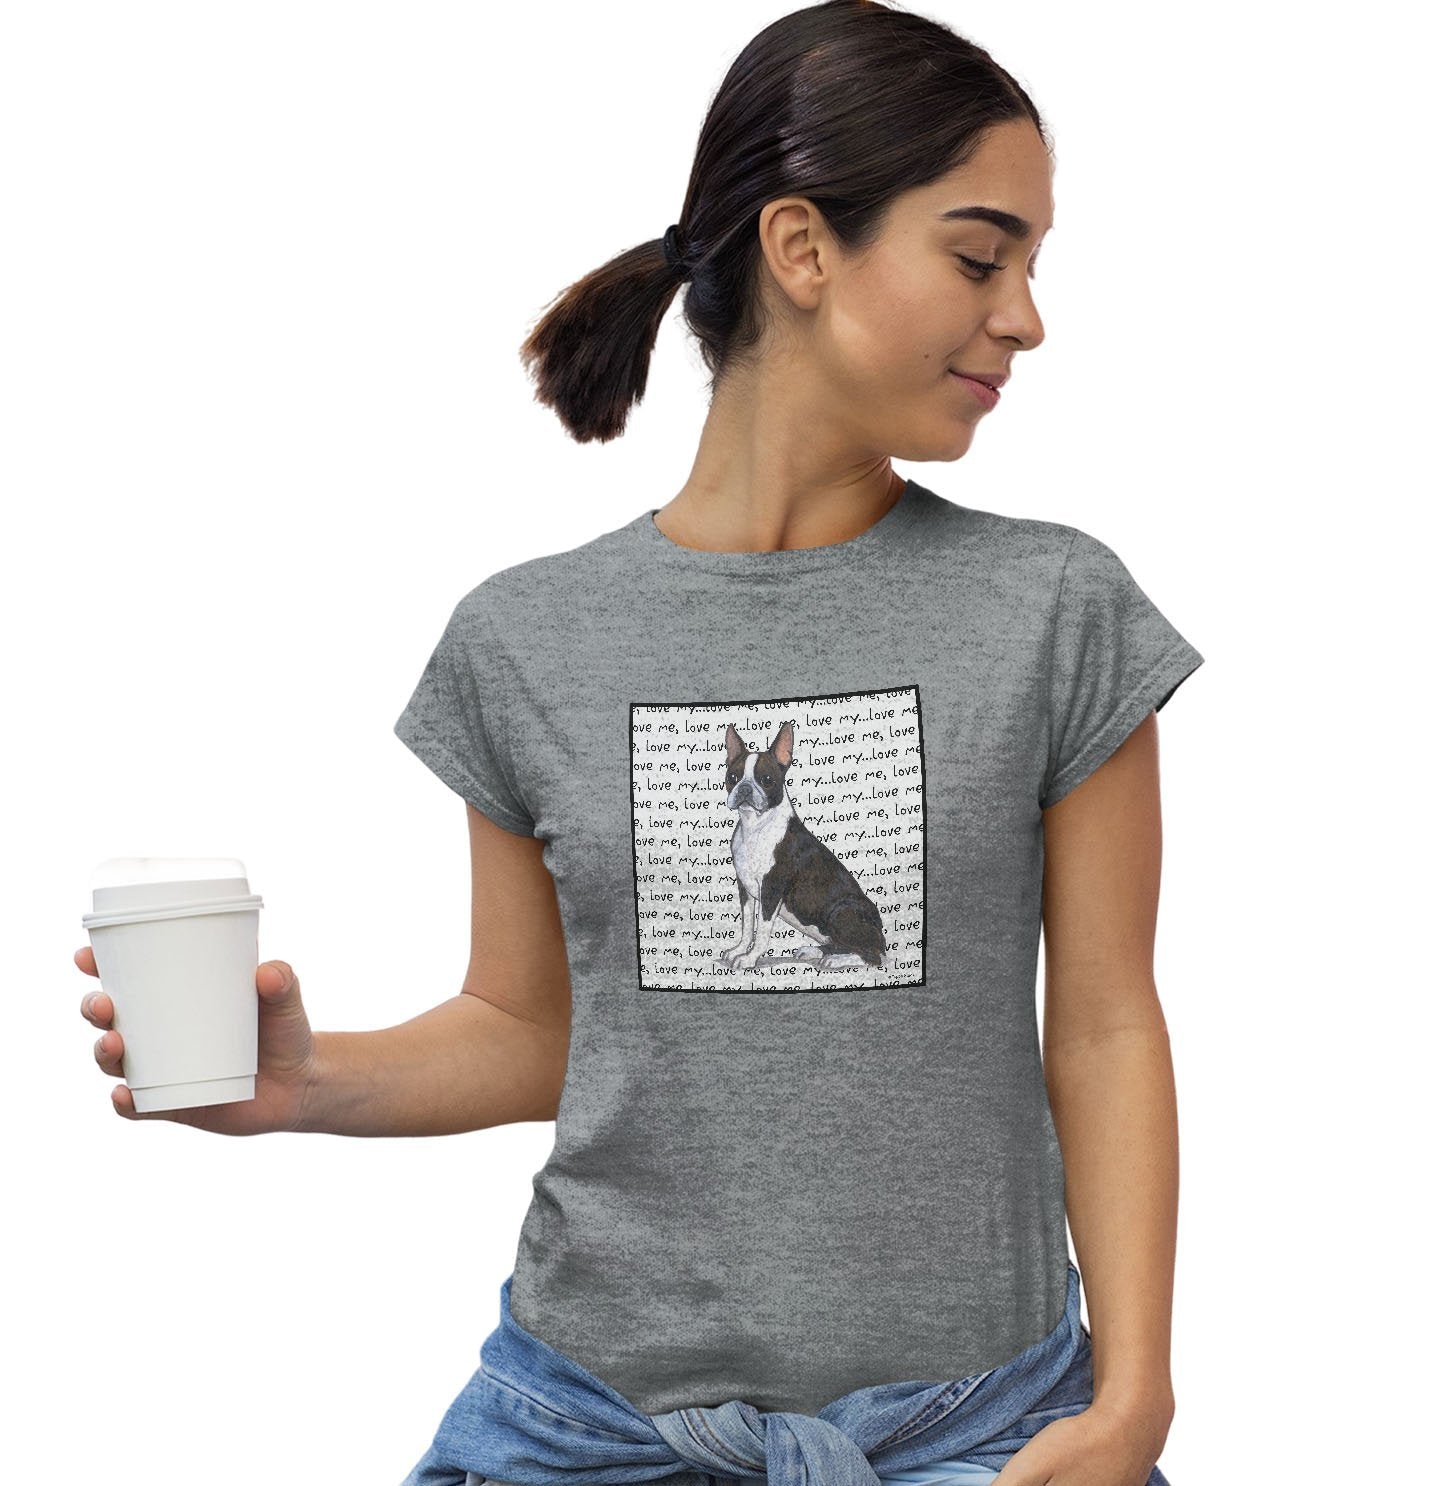 Boston Terrier Love Text - Women's Fitted T-Shirt